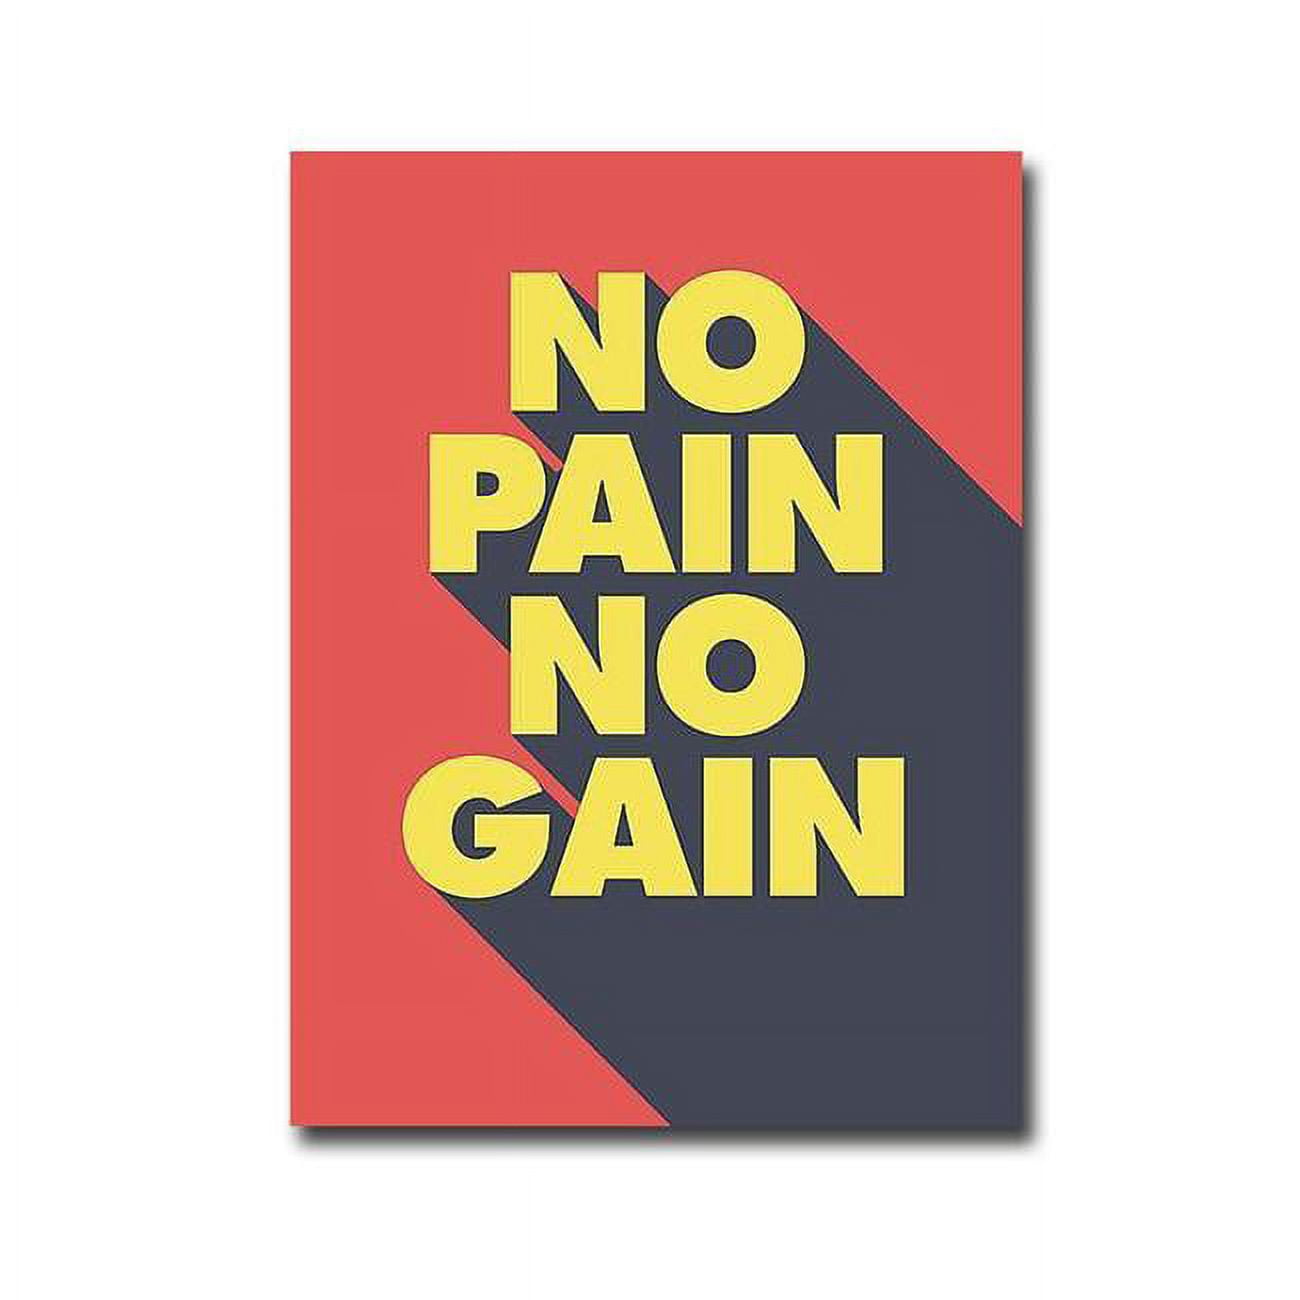 1216584ig No Pain No Gain By Graphic Premium Gallery-wrapped Canvas Giclee Art - 16 X 12 In.